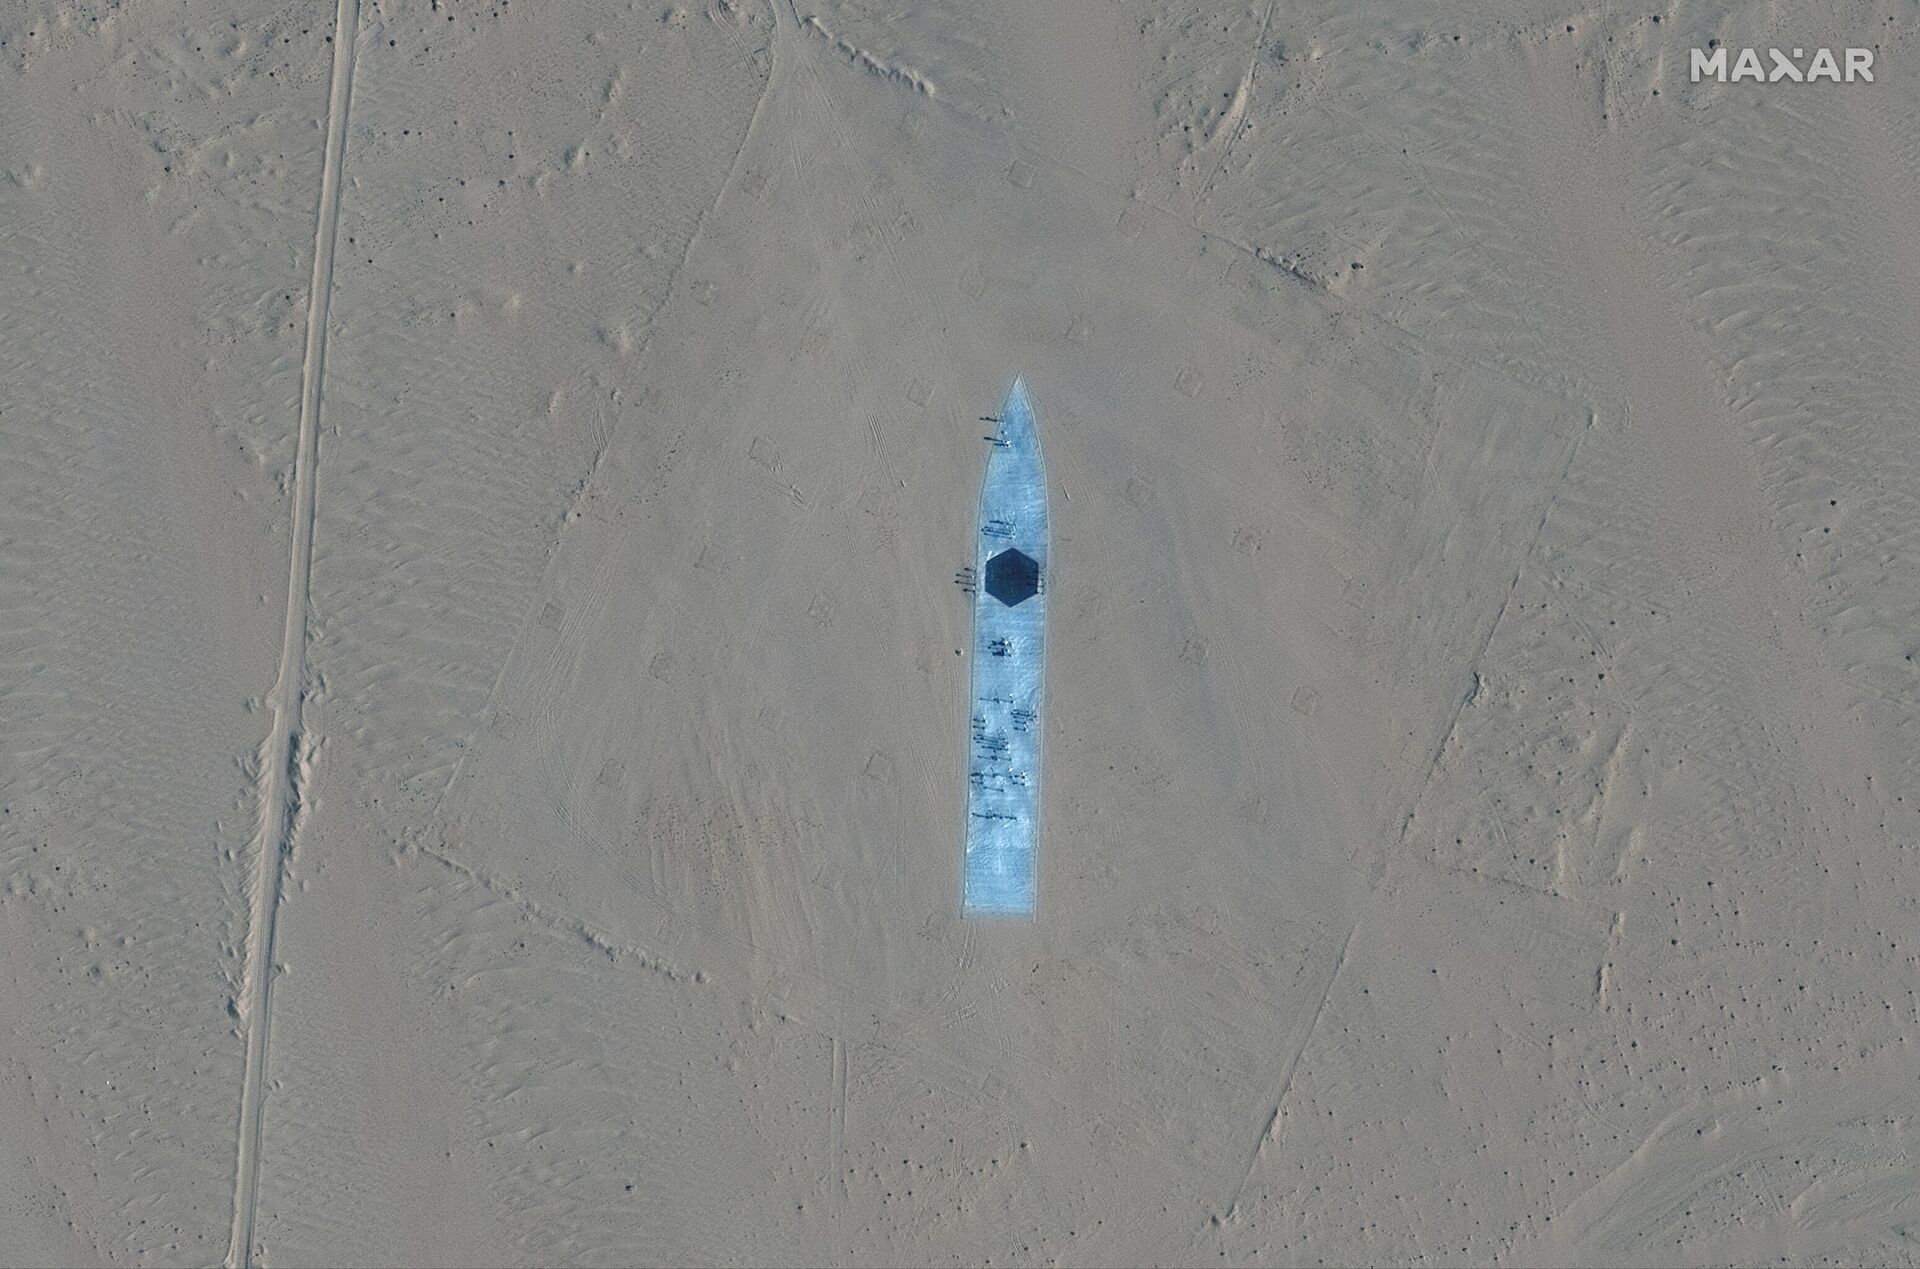 This handout satellite image released by Maxar Technologies on November 8, 2021 shows a target depicting a destroyer ship in Ruoqiang county in the Taklamakan Desert, in China's western Xinjiang region on October 20, 2021 - Sputnik International, 1920, 08.11.2021